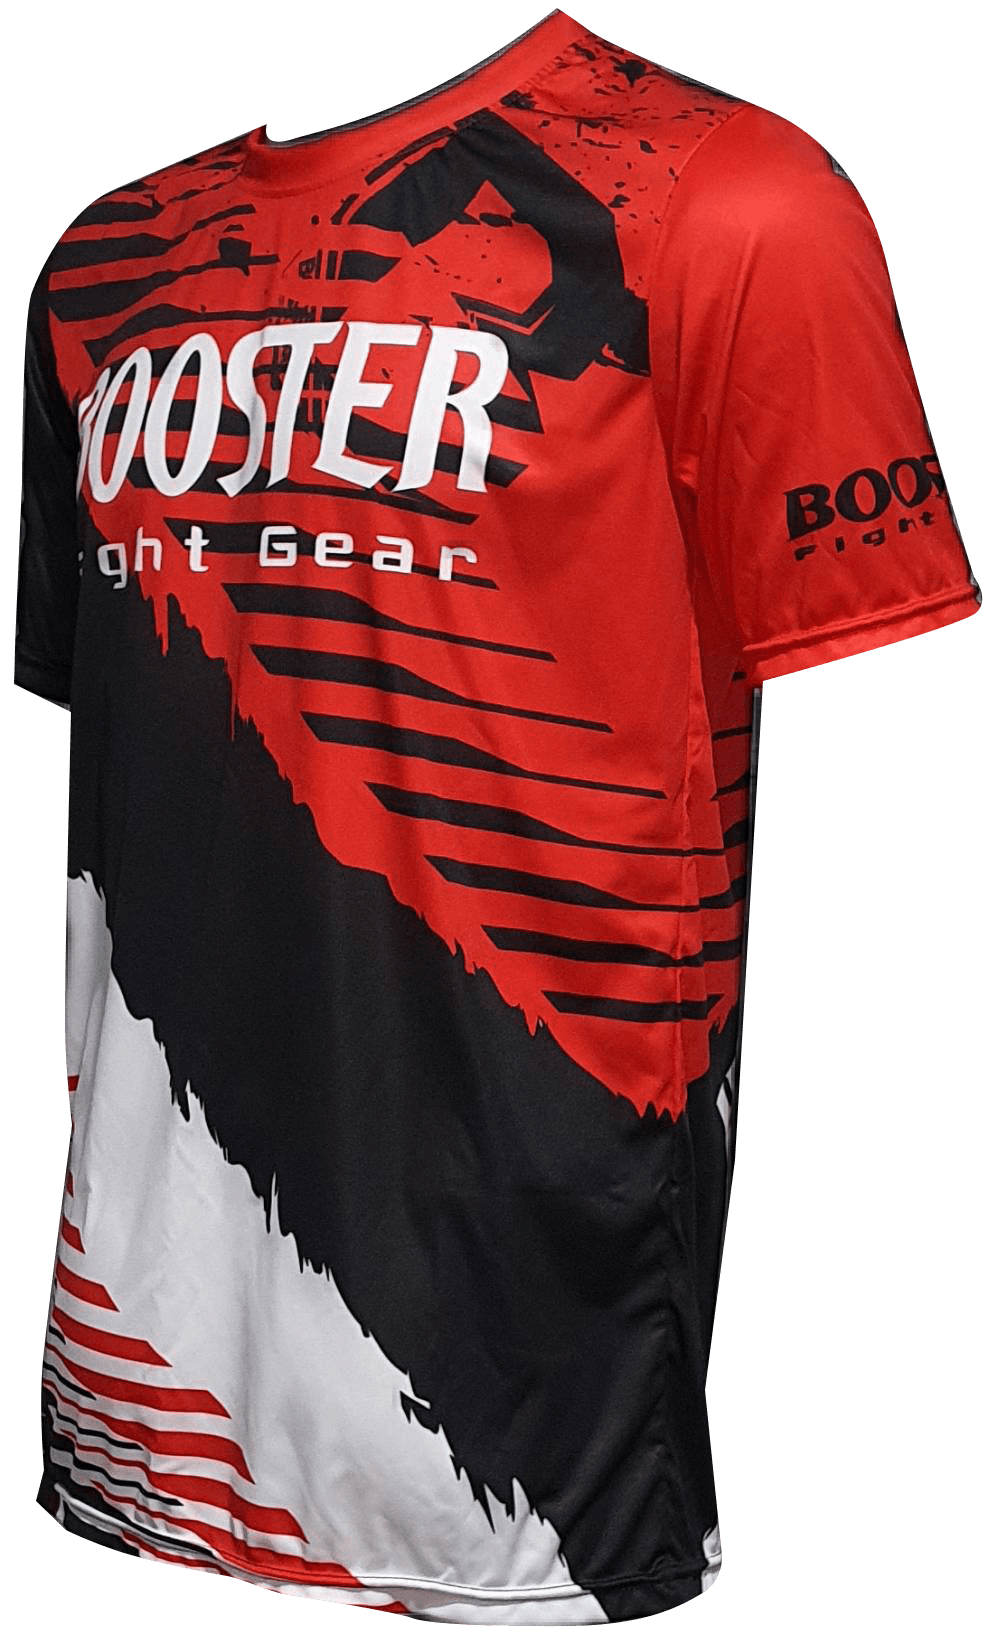 Booster T-shirt Red-02 Booster